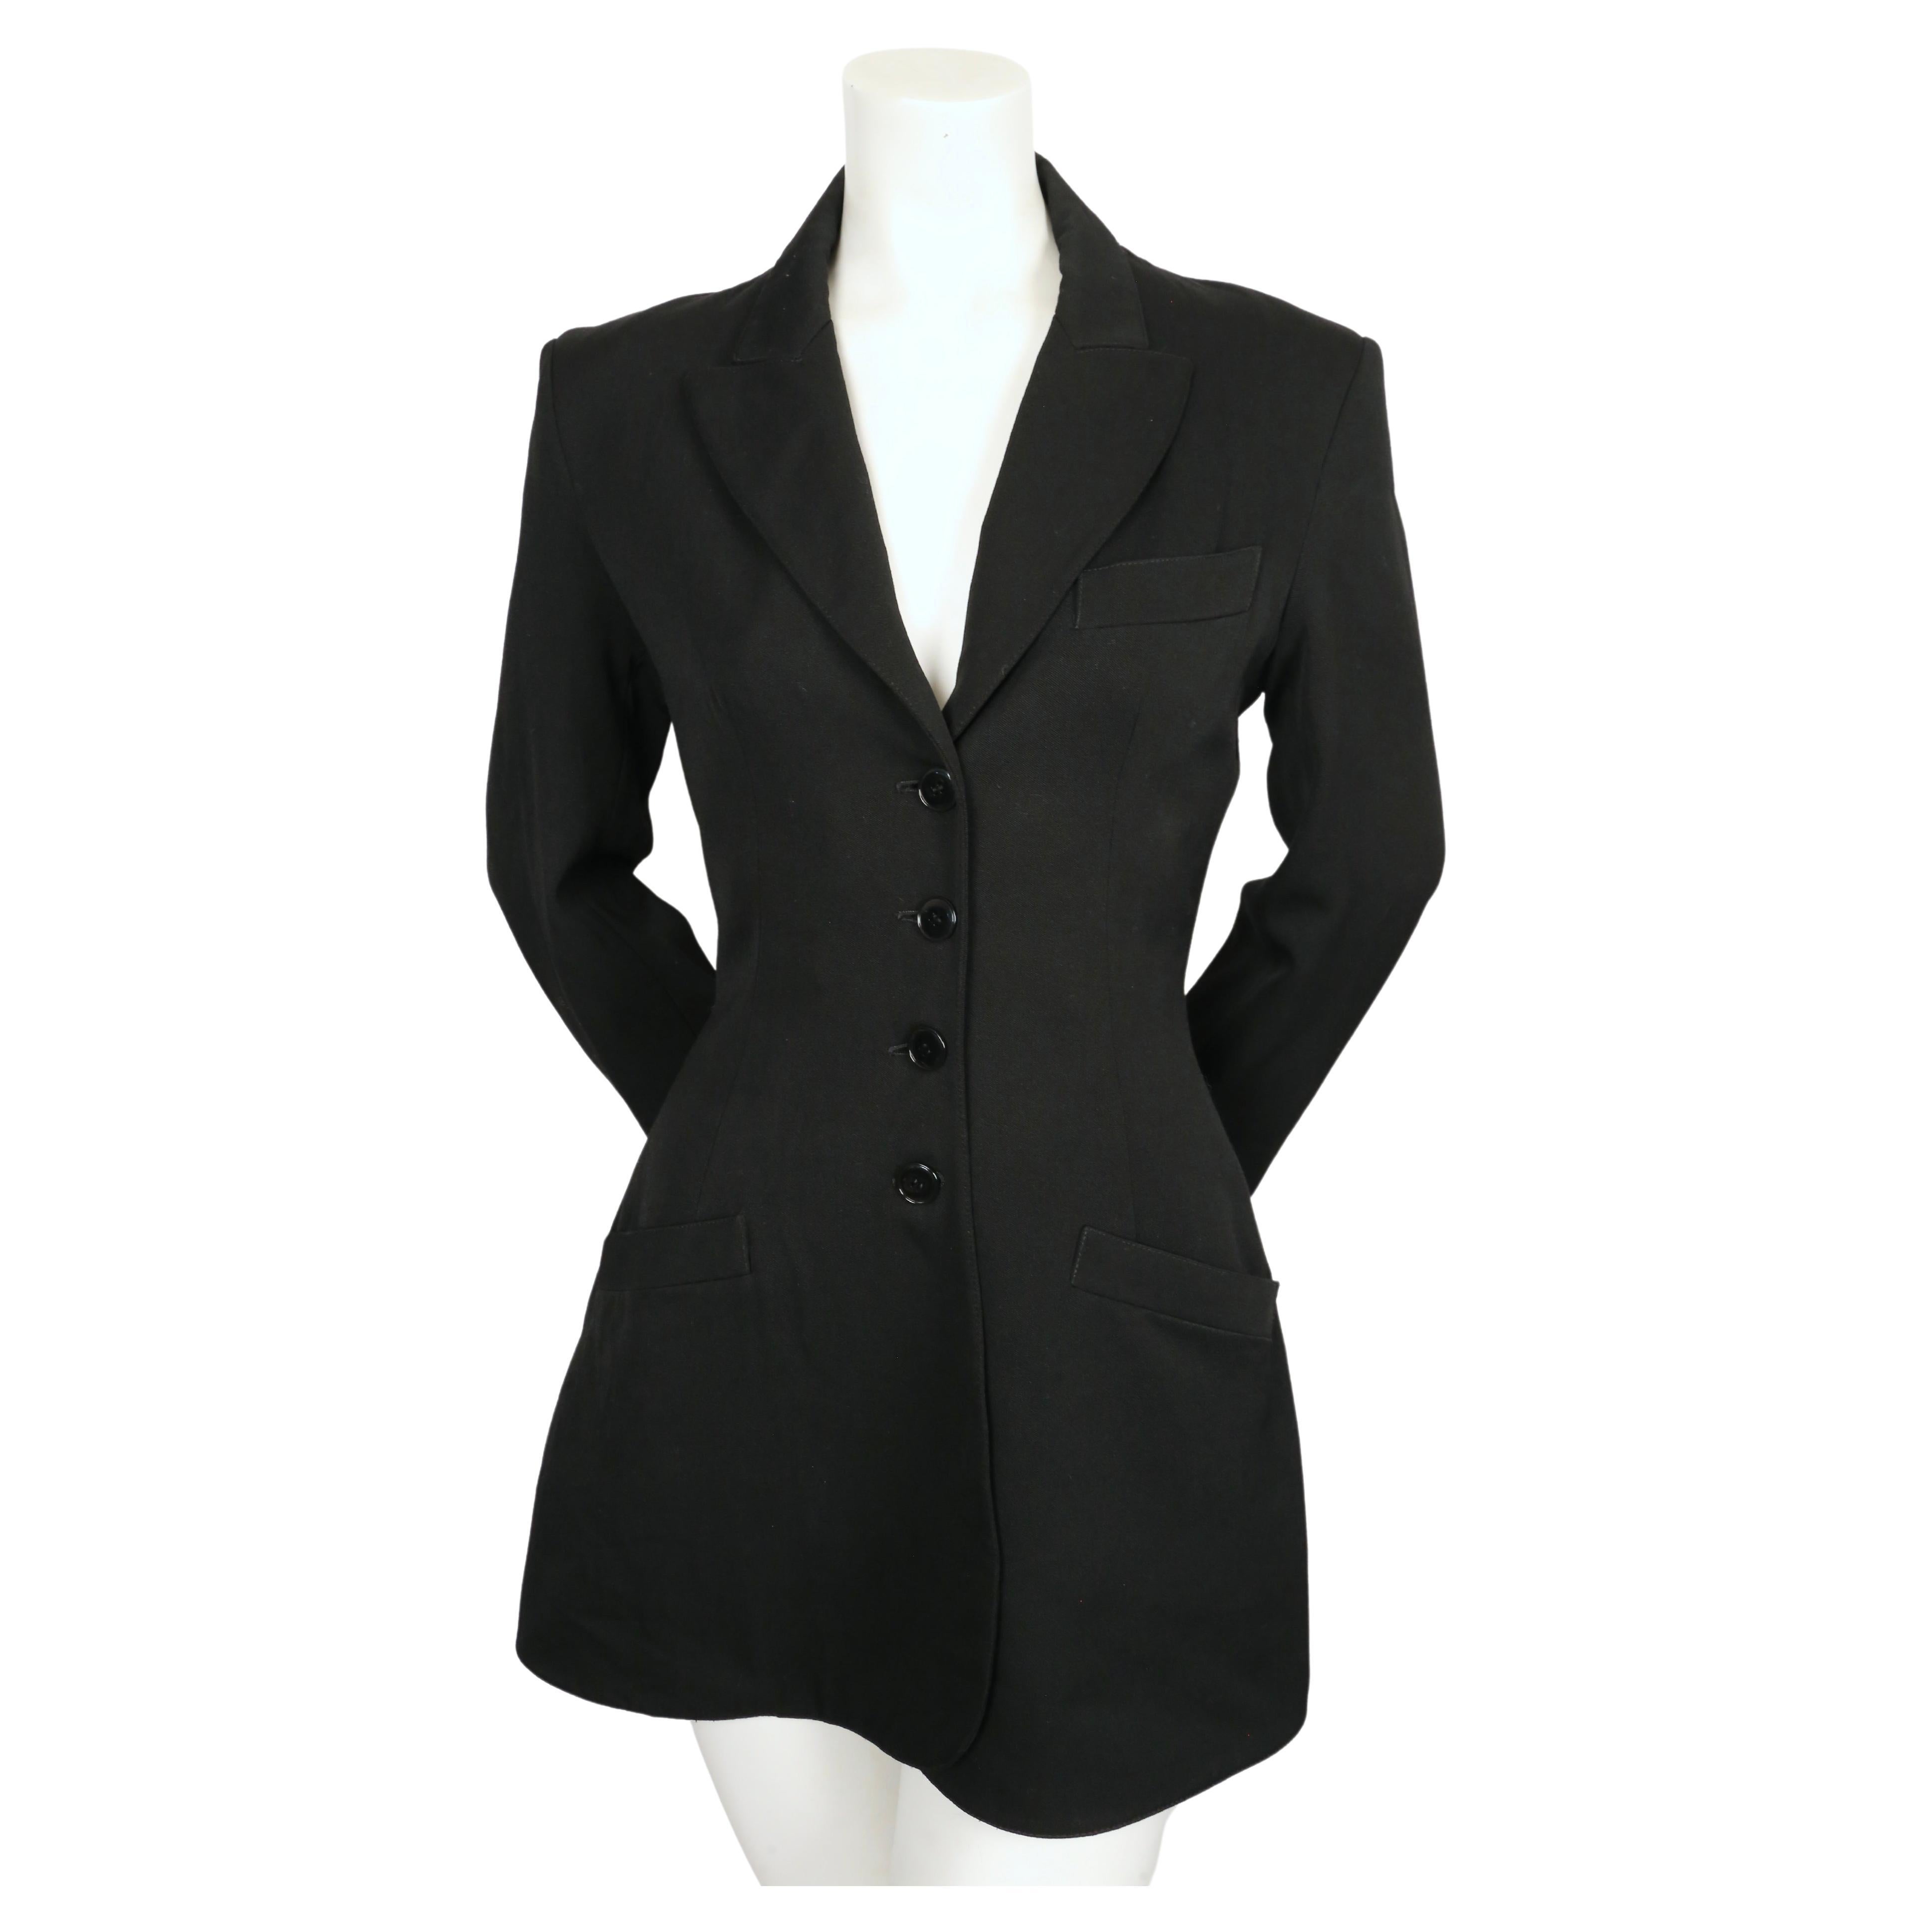 Jet-black wool jacket with flared hemline and button closure designed by Azzedine Alaia dating to the late 1980's, early 1990's. French size 36 which best fit a US 2-4. Approximate measurements: shoulder 16.75